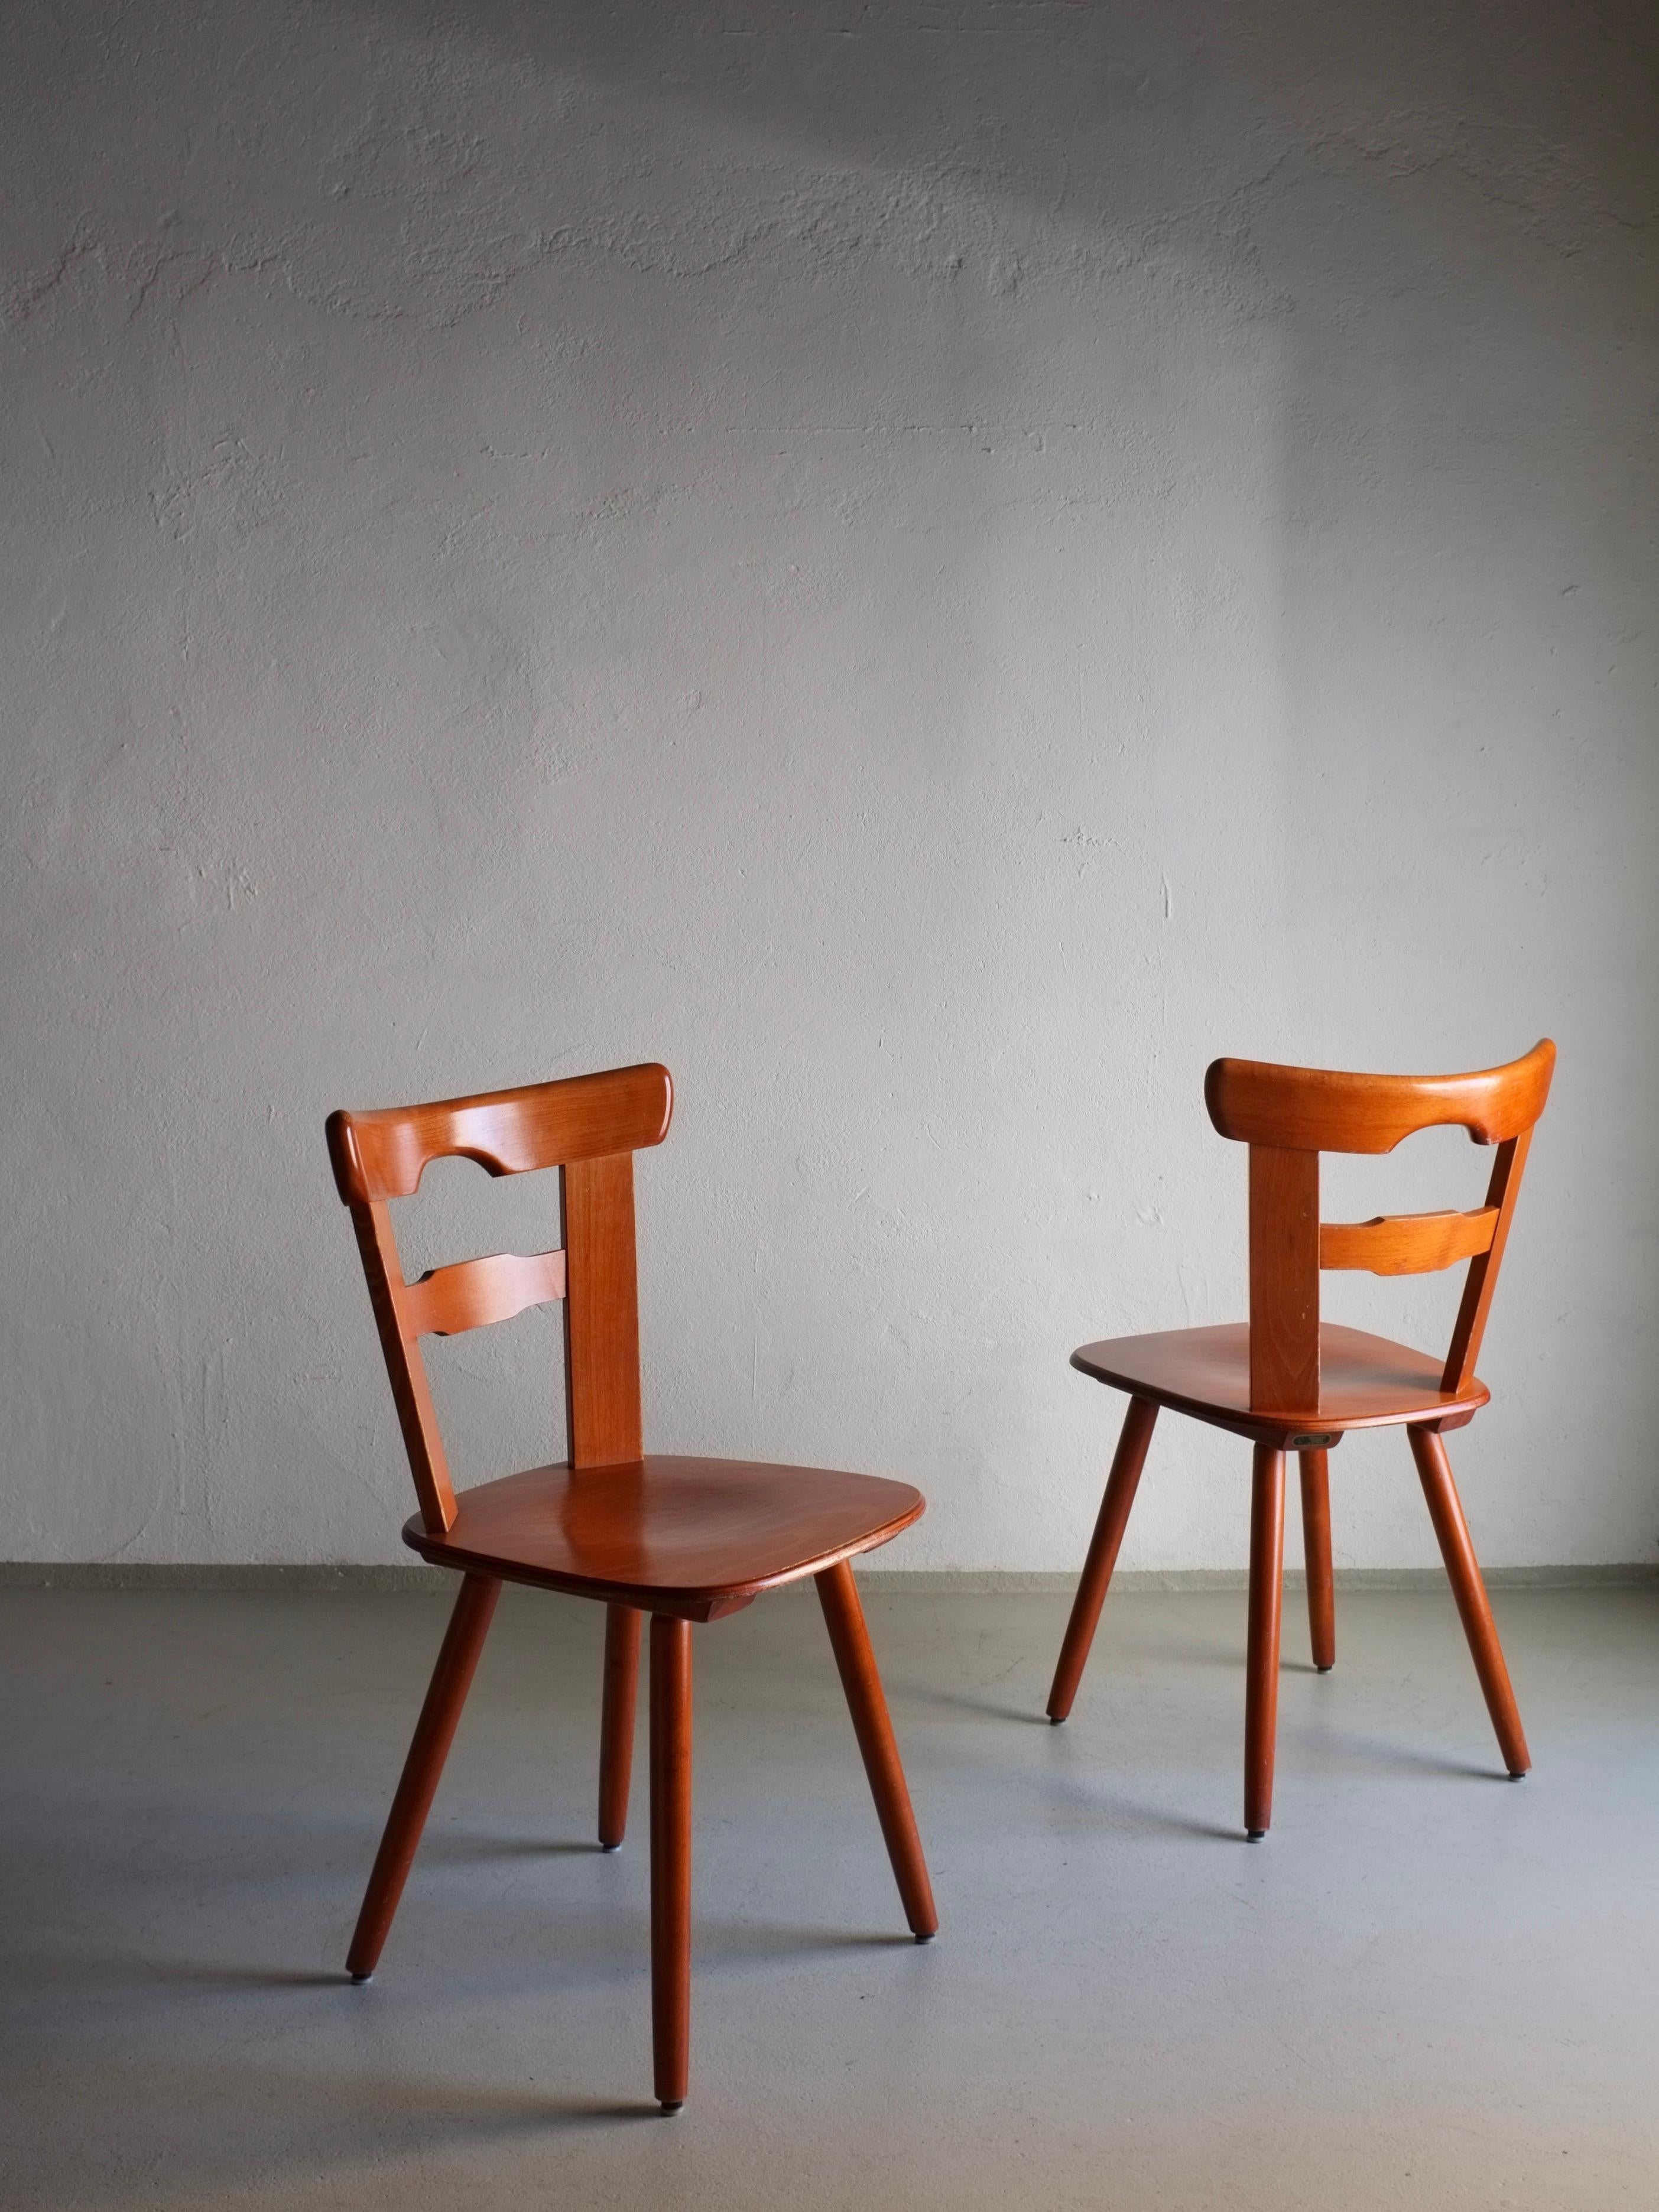 Brutalist 6 Carved Wood Dining Chairs, Netherlands, 1970s For Sale